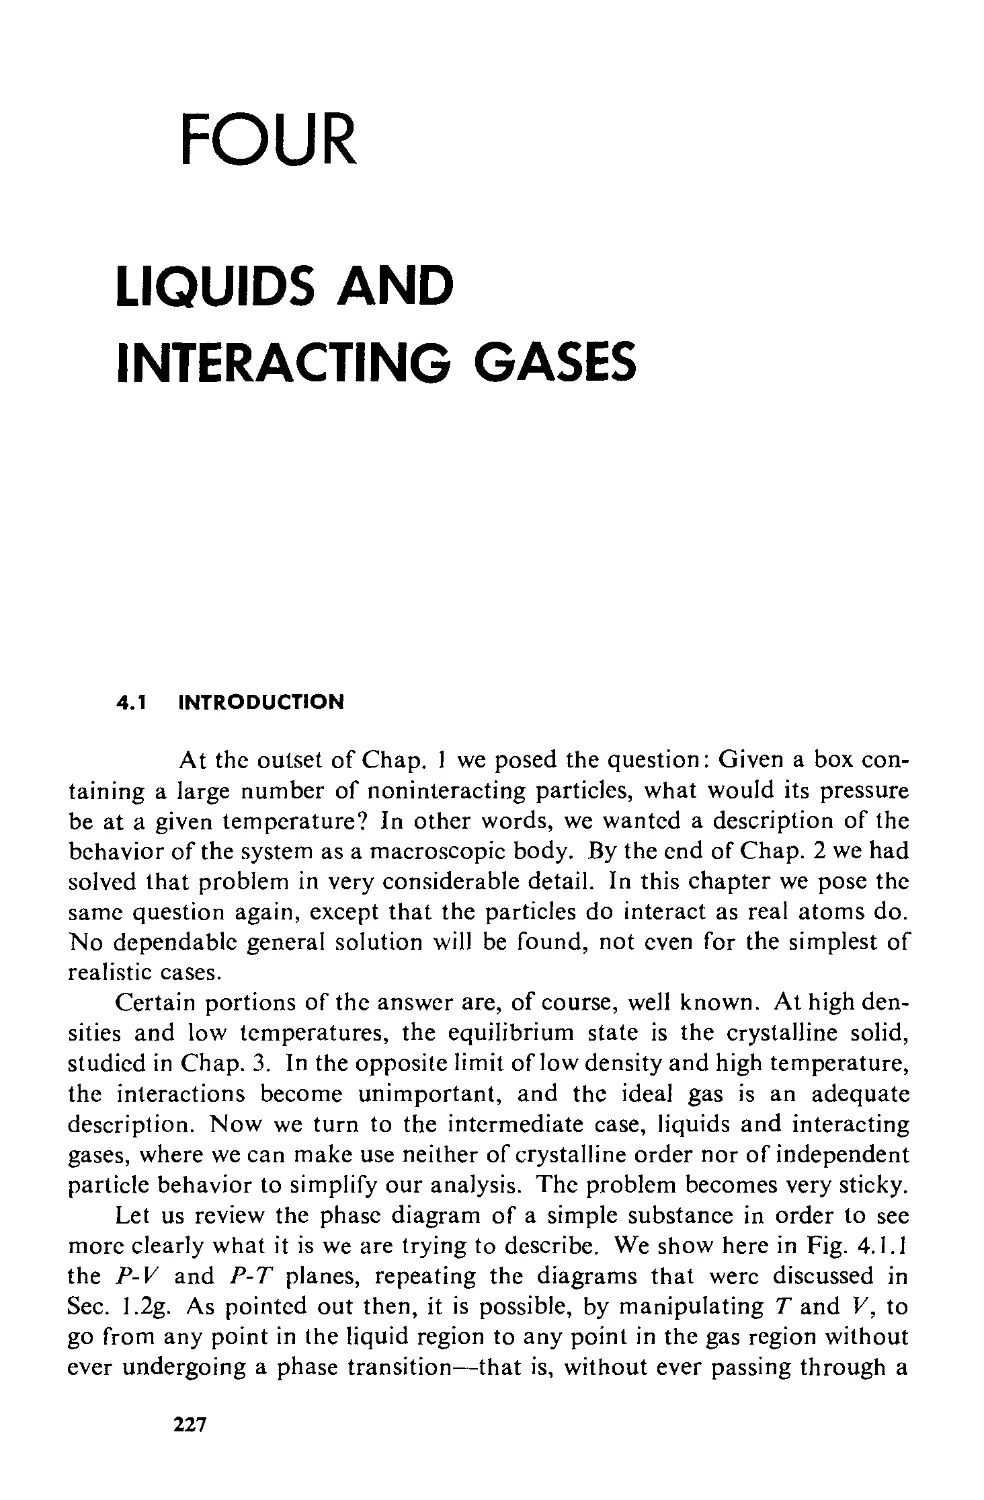 4. Liquids and Interacting Gases